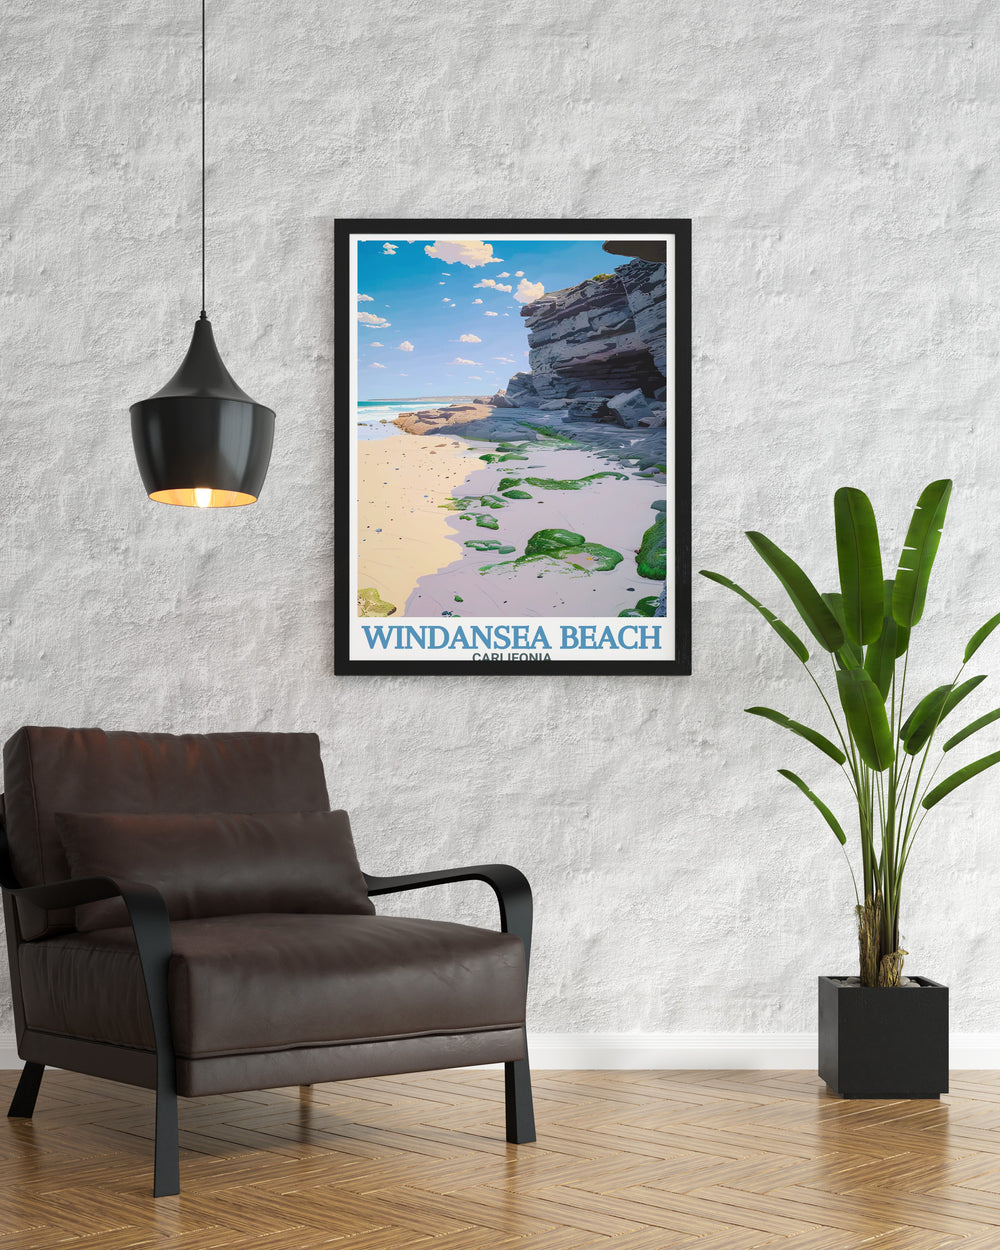 La Jolla Poster featuring beautiful rock formations and coastal scenery ideal for adding a vintage touch to modern décor. This beach poster is a wonderful travel print and makes a great personalized gift for those who love San Diego and California beaches.